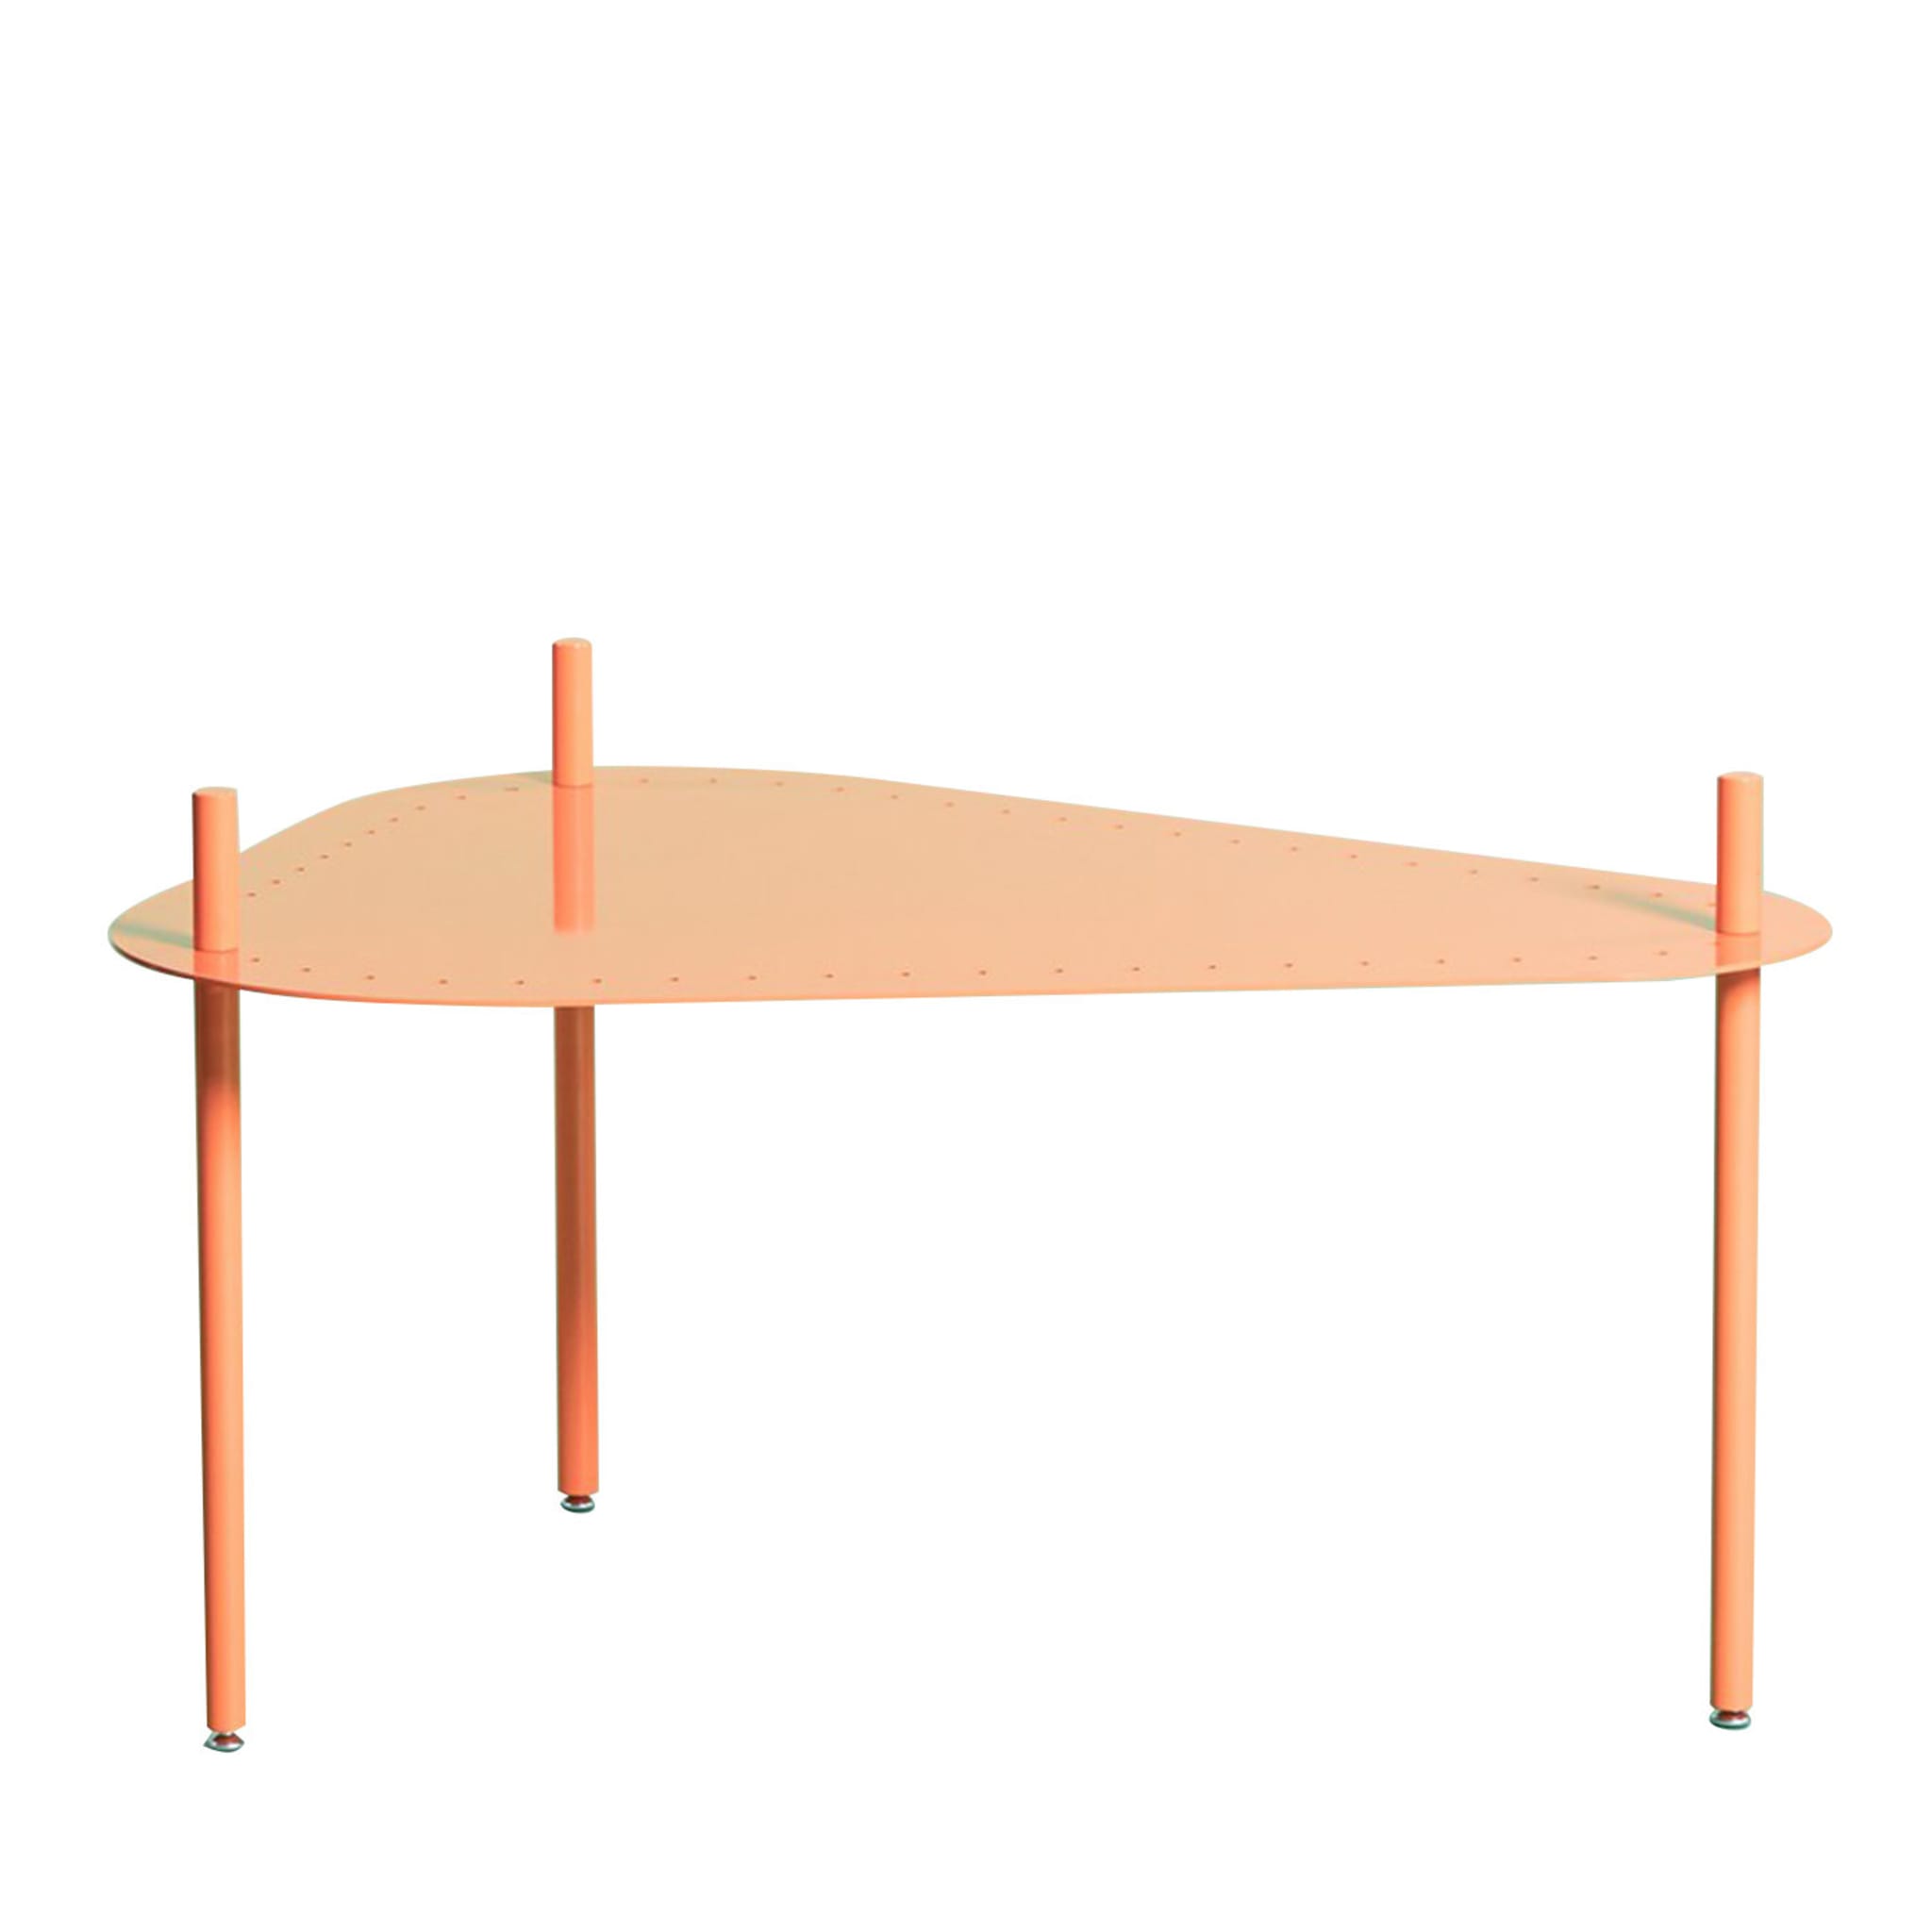 Bea08 Melon Table Modular System by MM Company - Main view